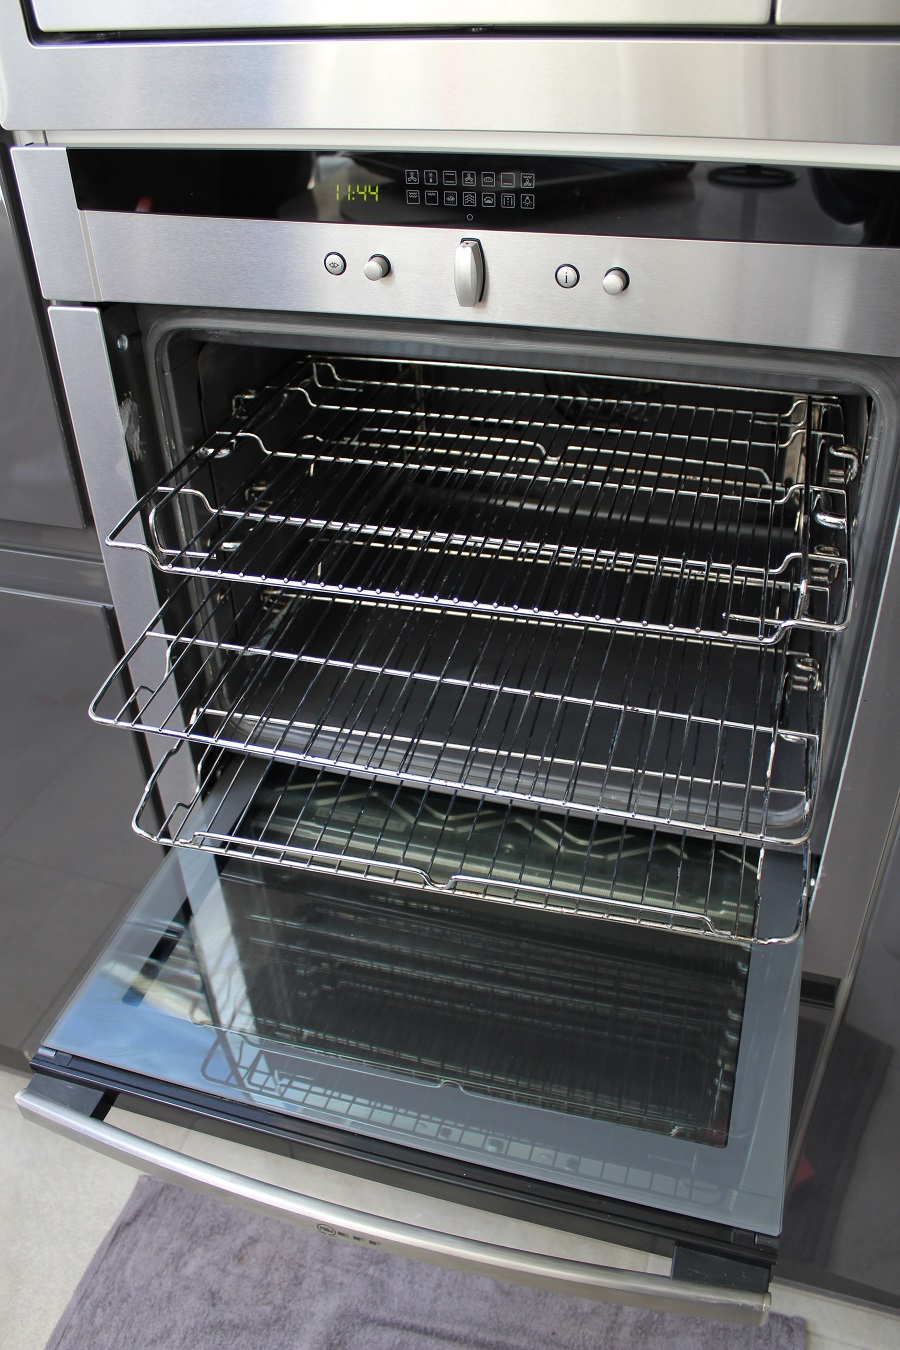 What to think about when using an Oven Cleaning service